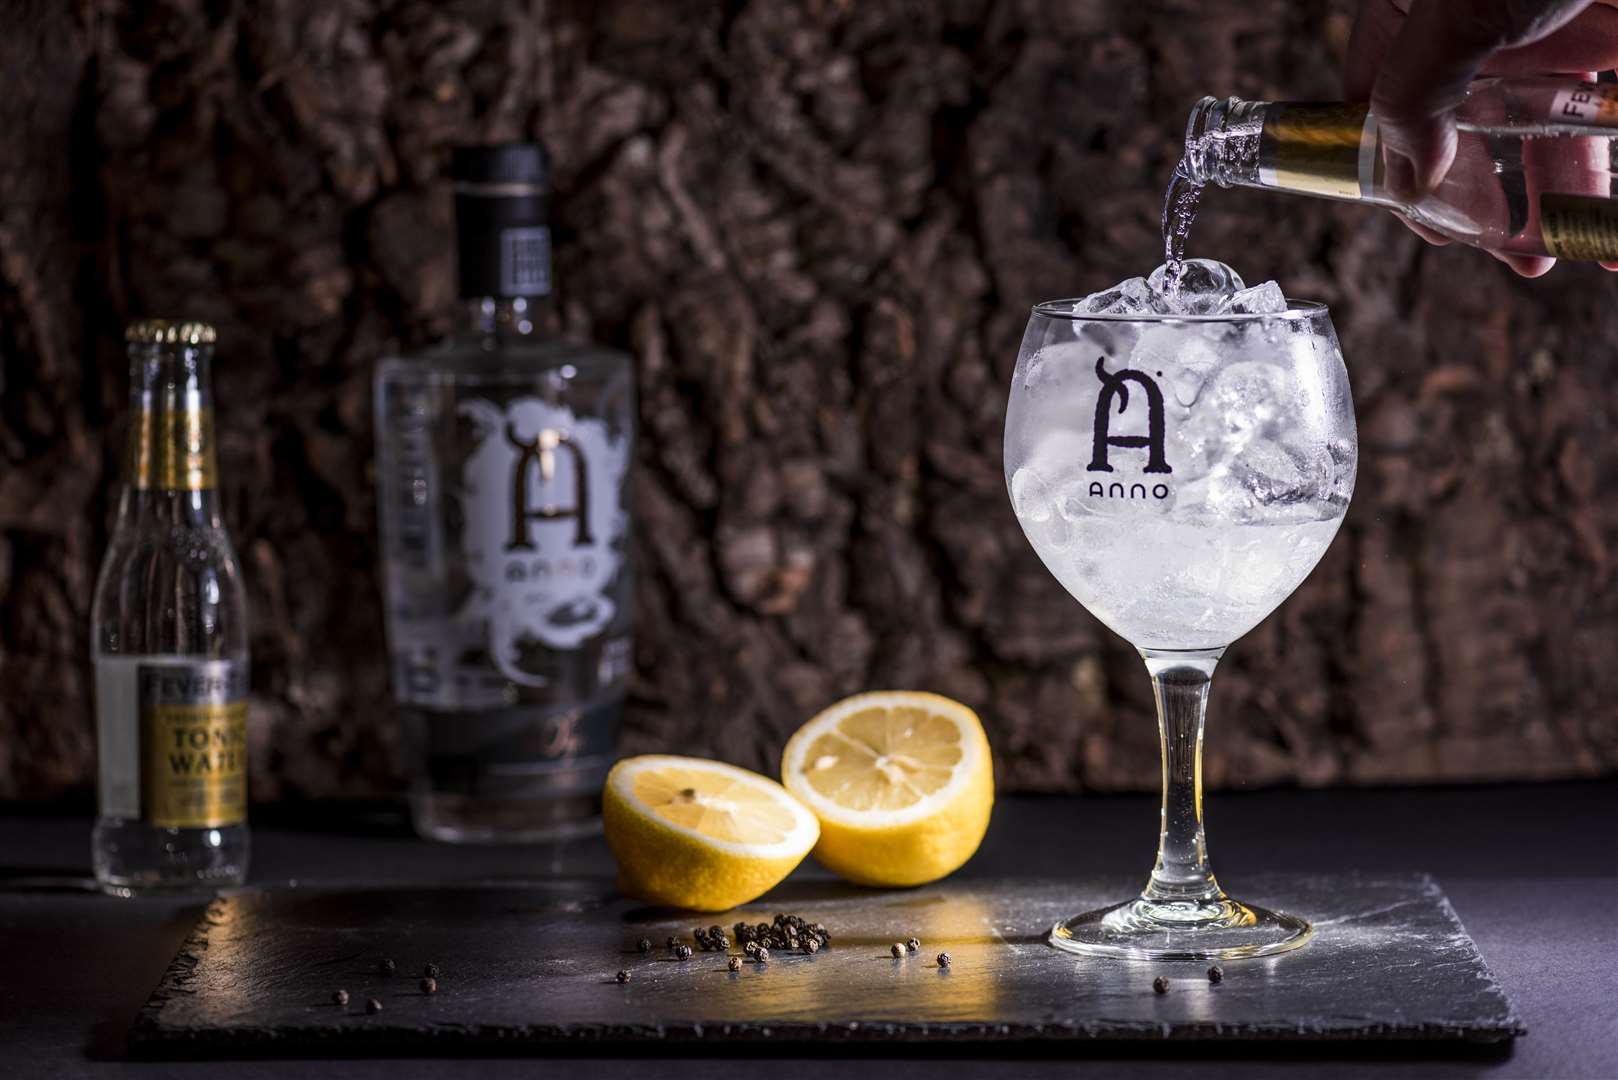 Gin from Marden's Anno Distillery - just don't expect a zero-alcohol version any time soon